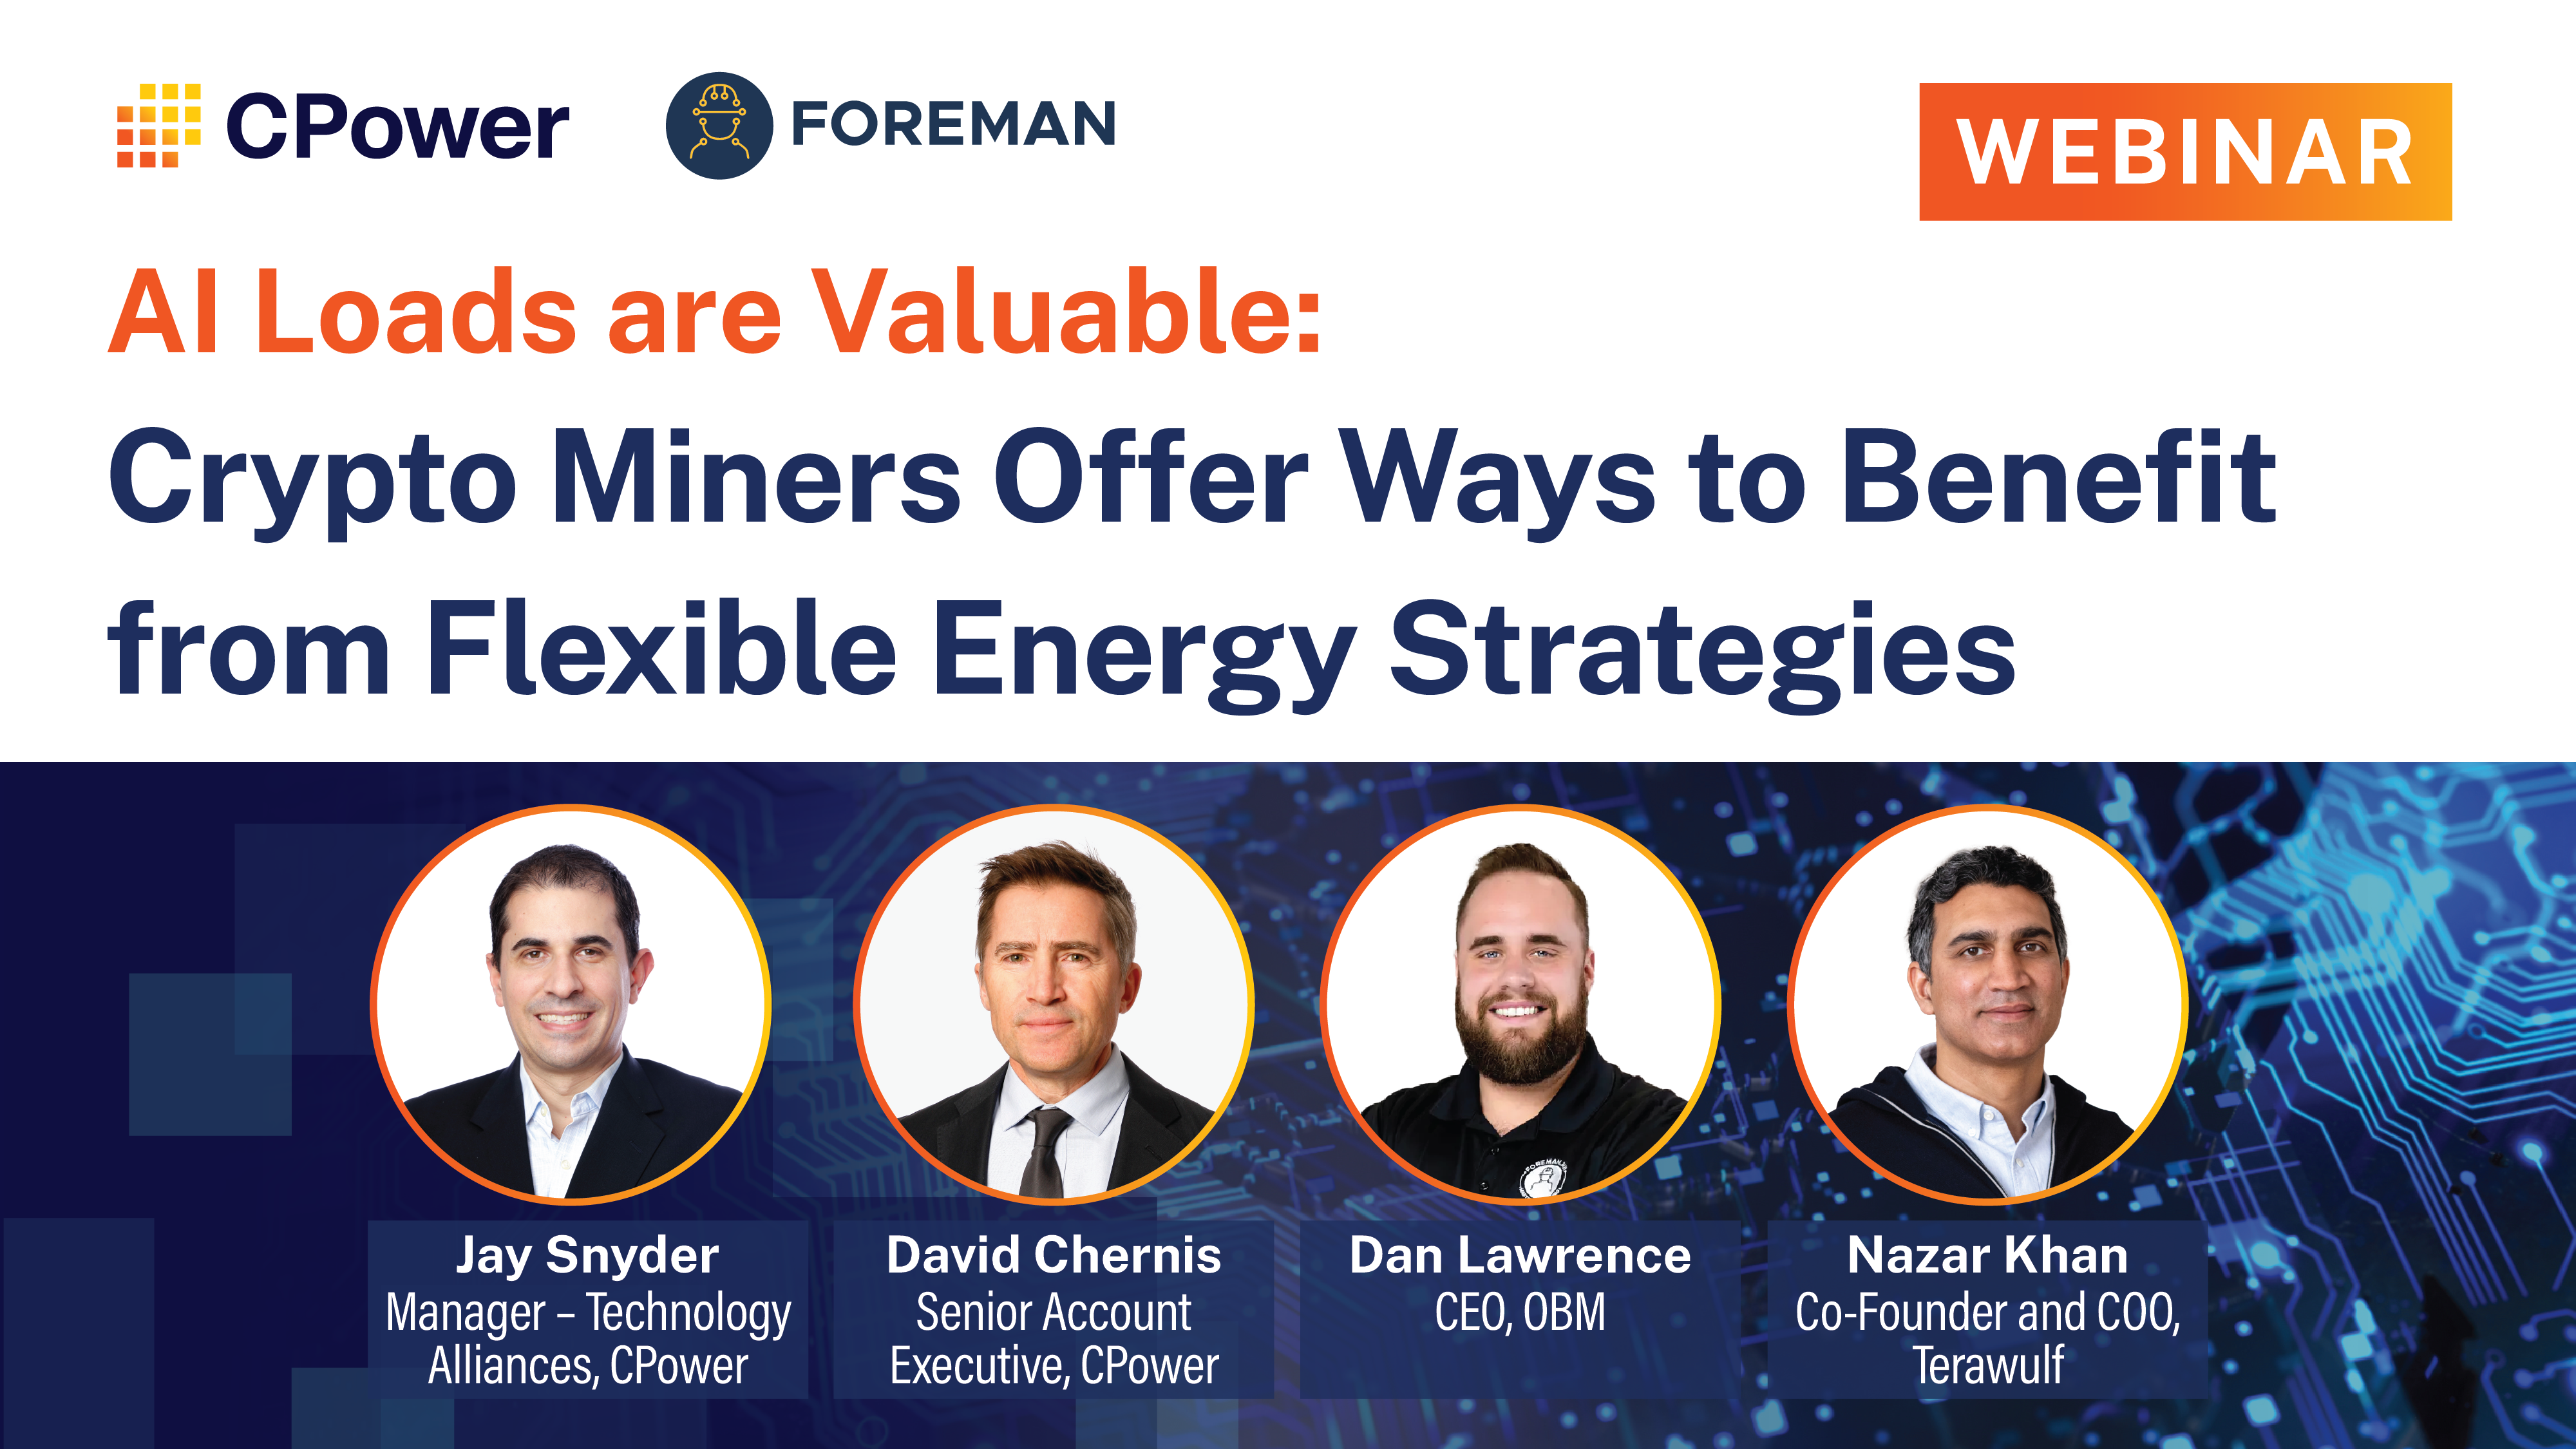 AI Loads are Valuable: Crypto Miners Offer Ways to Benefit from Flexible Energy Strategies